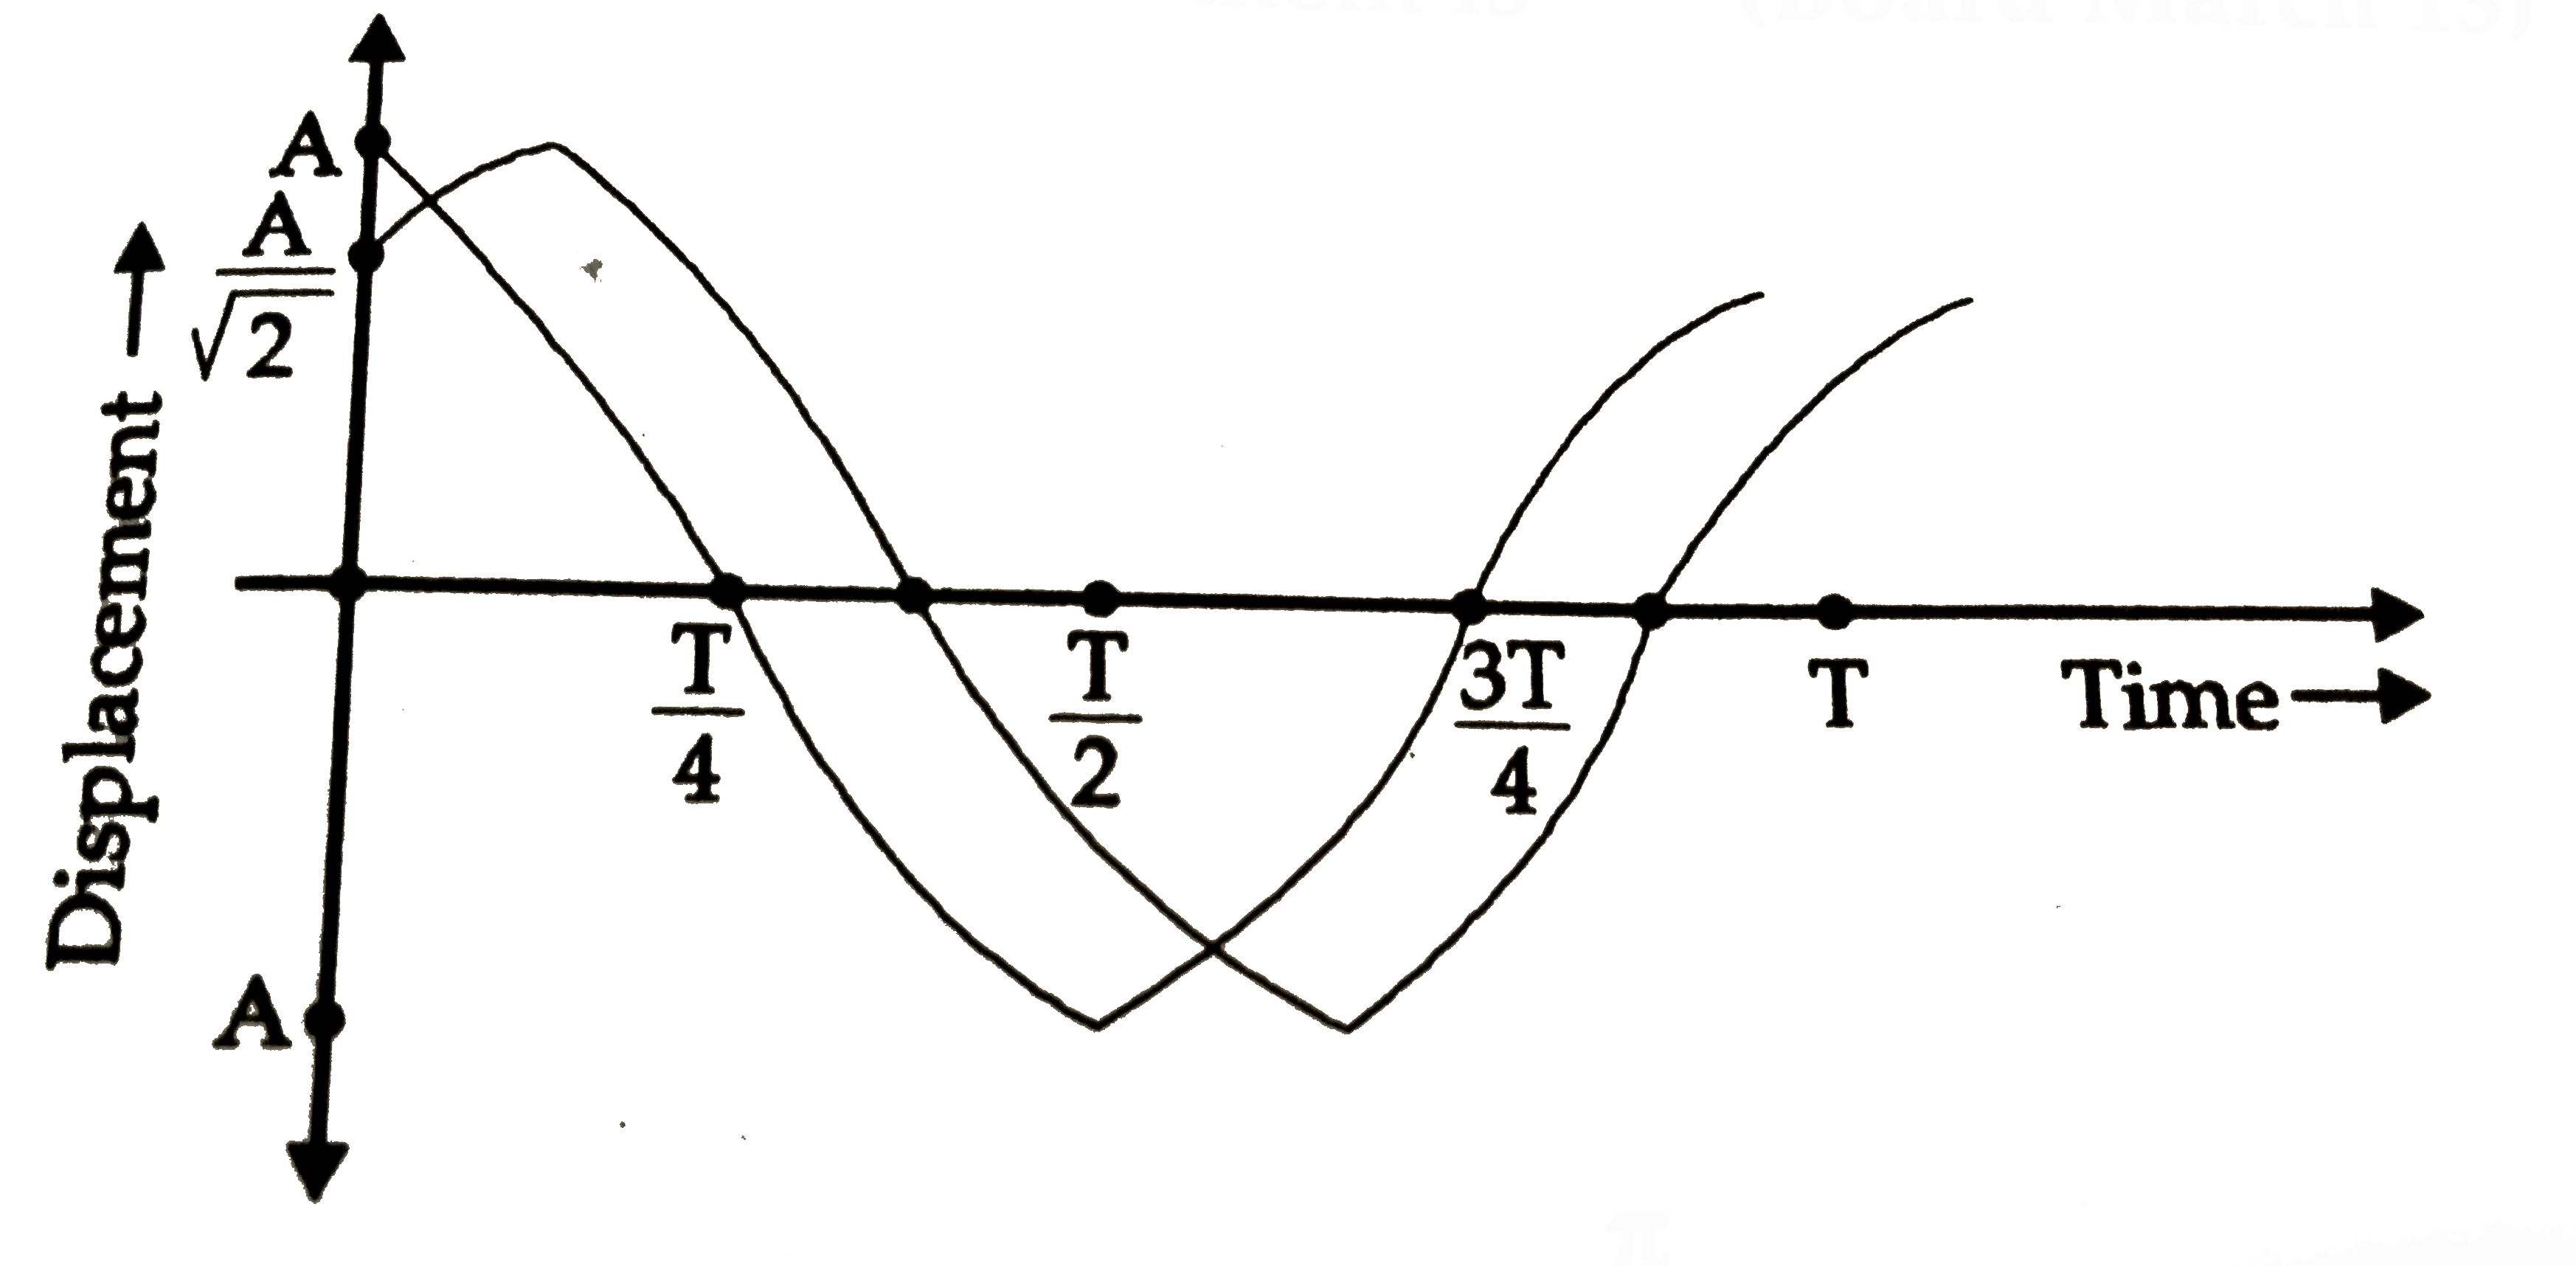 Two particles perform linear simple harmonic motion along the same path of length 2 A and period T as shown in the graph below. The phase difference between them is